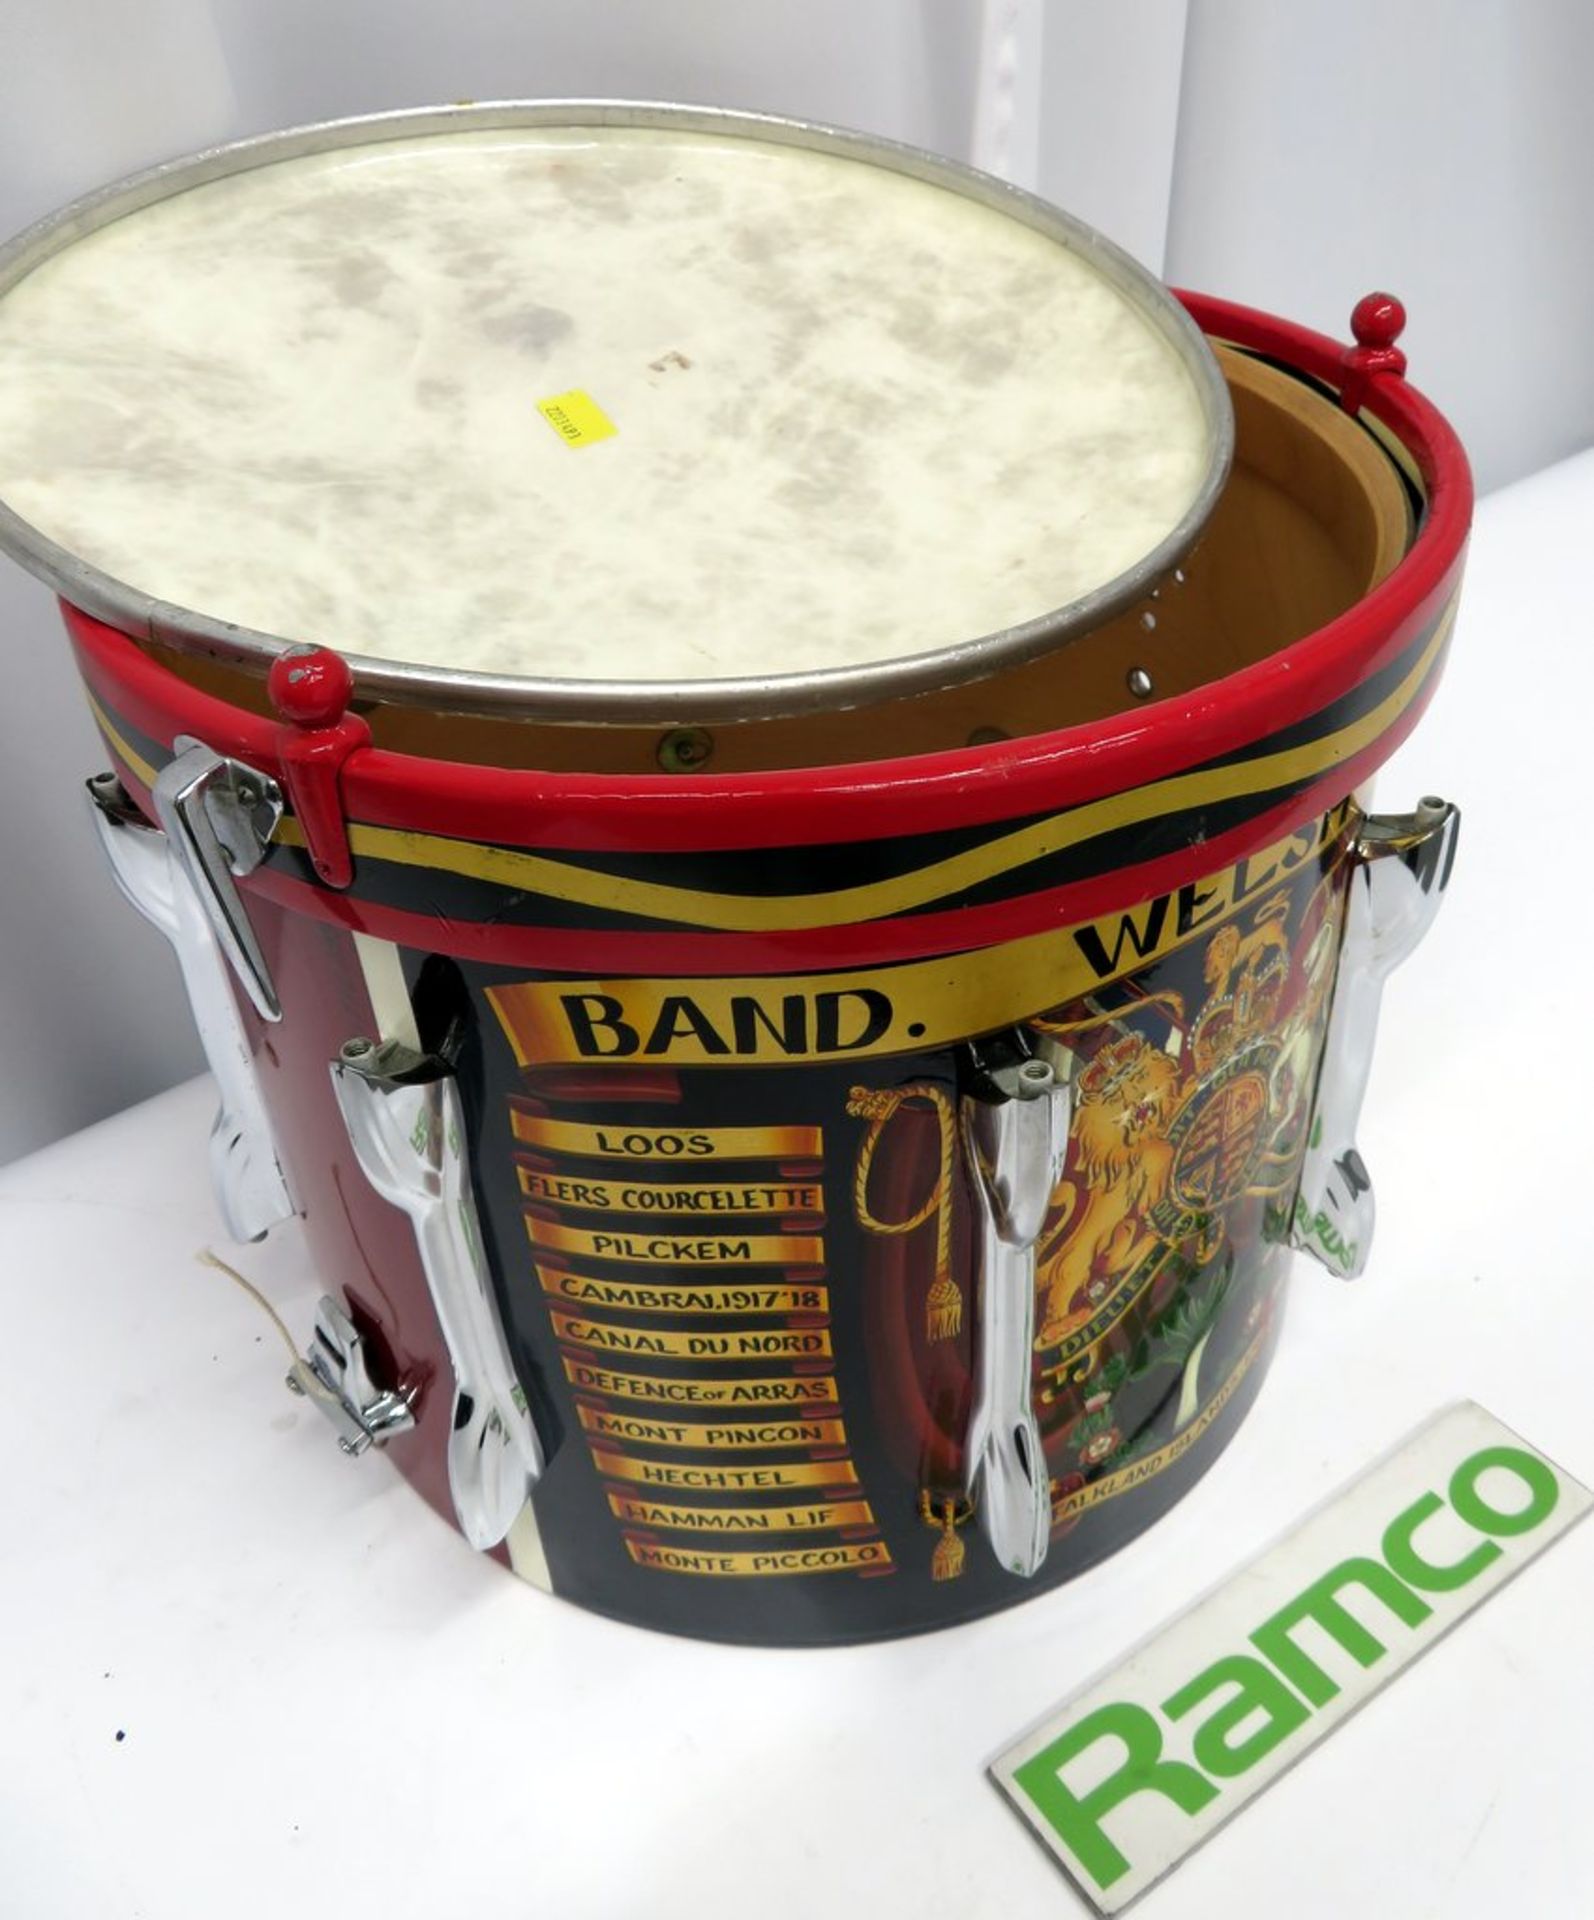 Premier Welsh Guards Side Marching Snare Drum Carcase. - Image 2 of 9